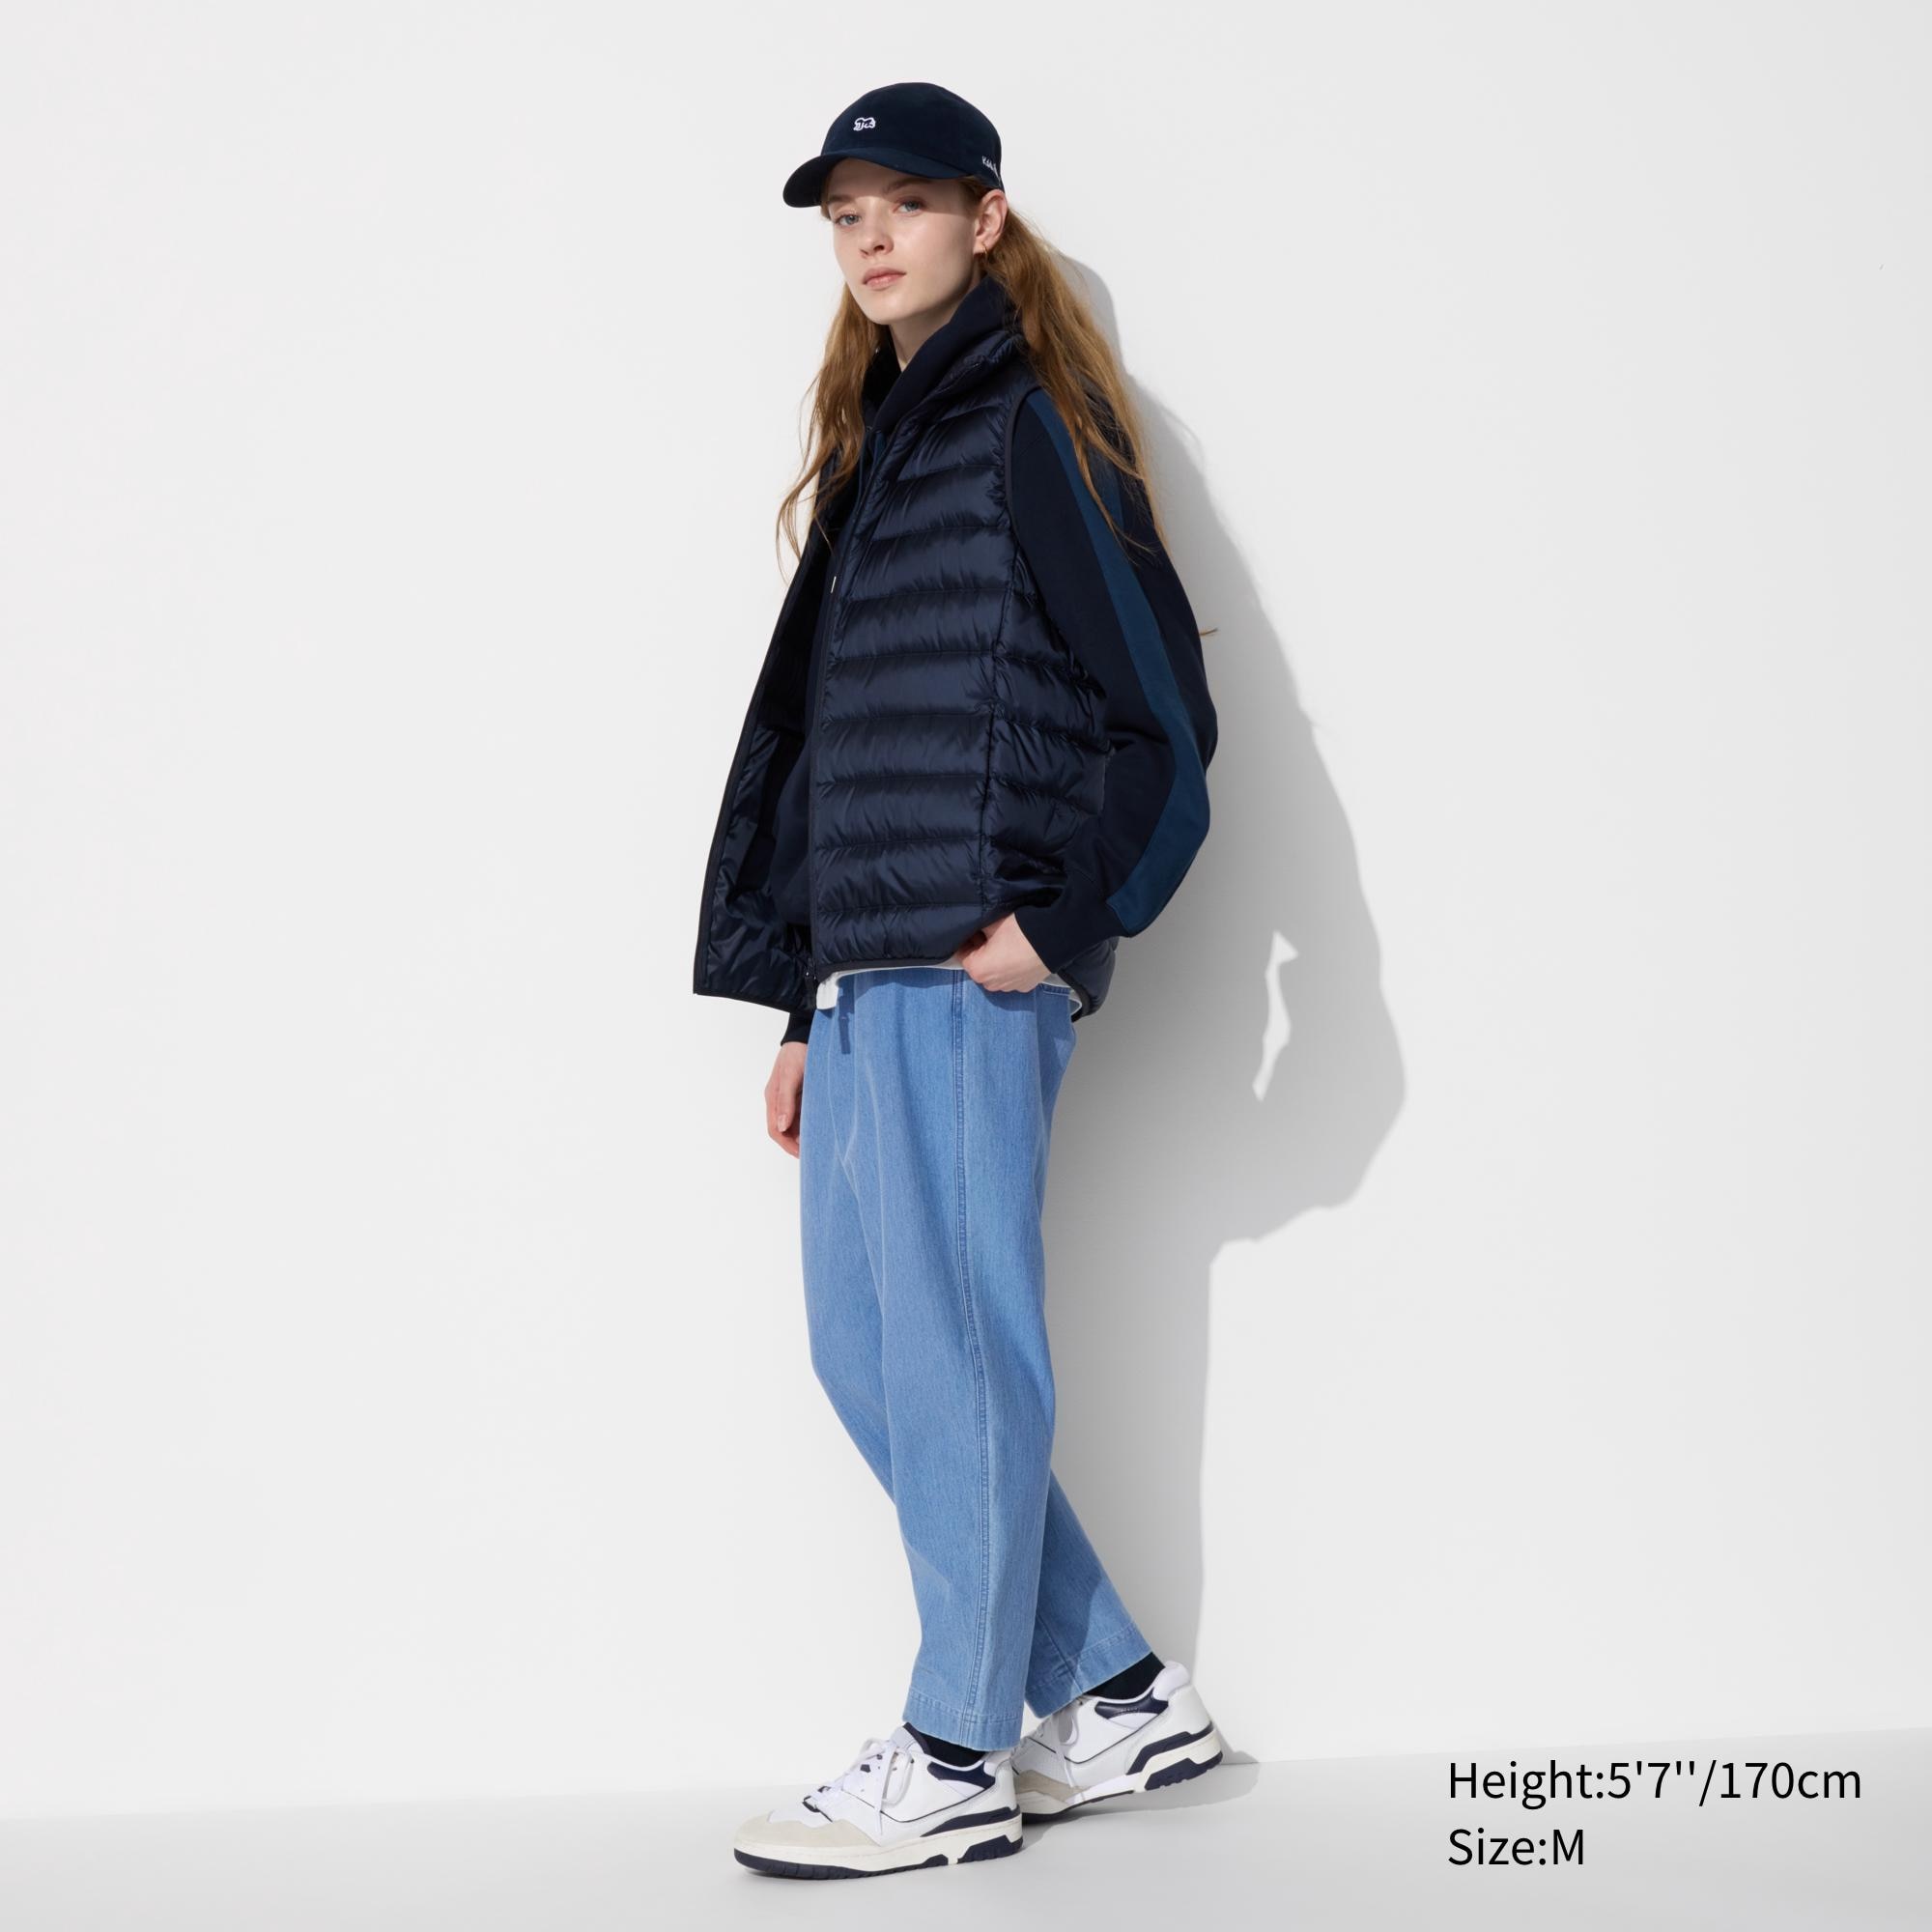 Check styling ideas for「Oversized Striped Half Sleeve T-Shirt、Denim ...